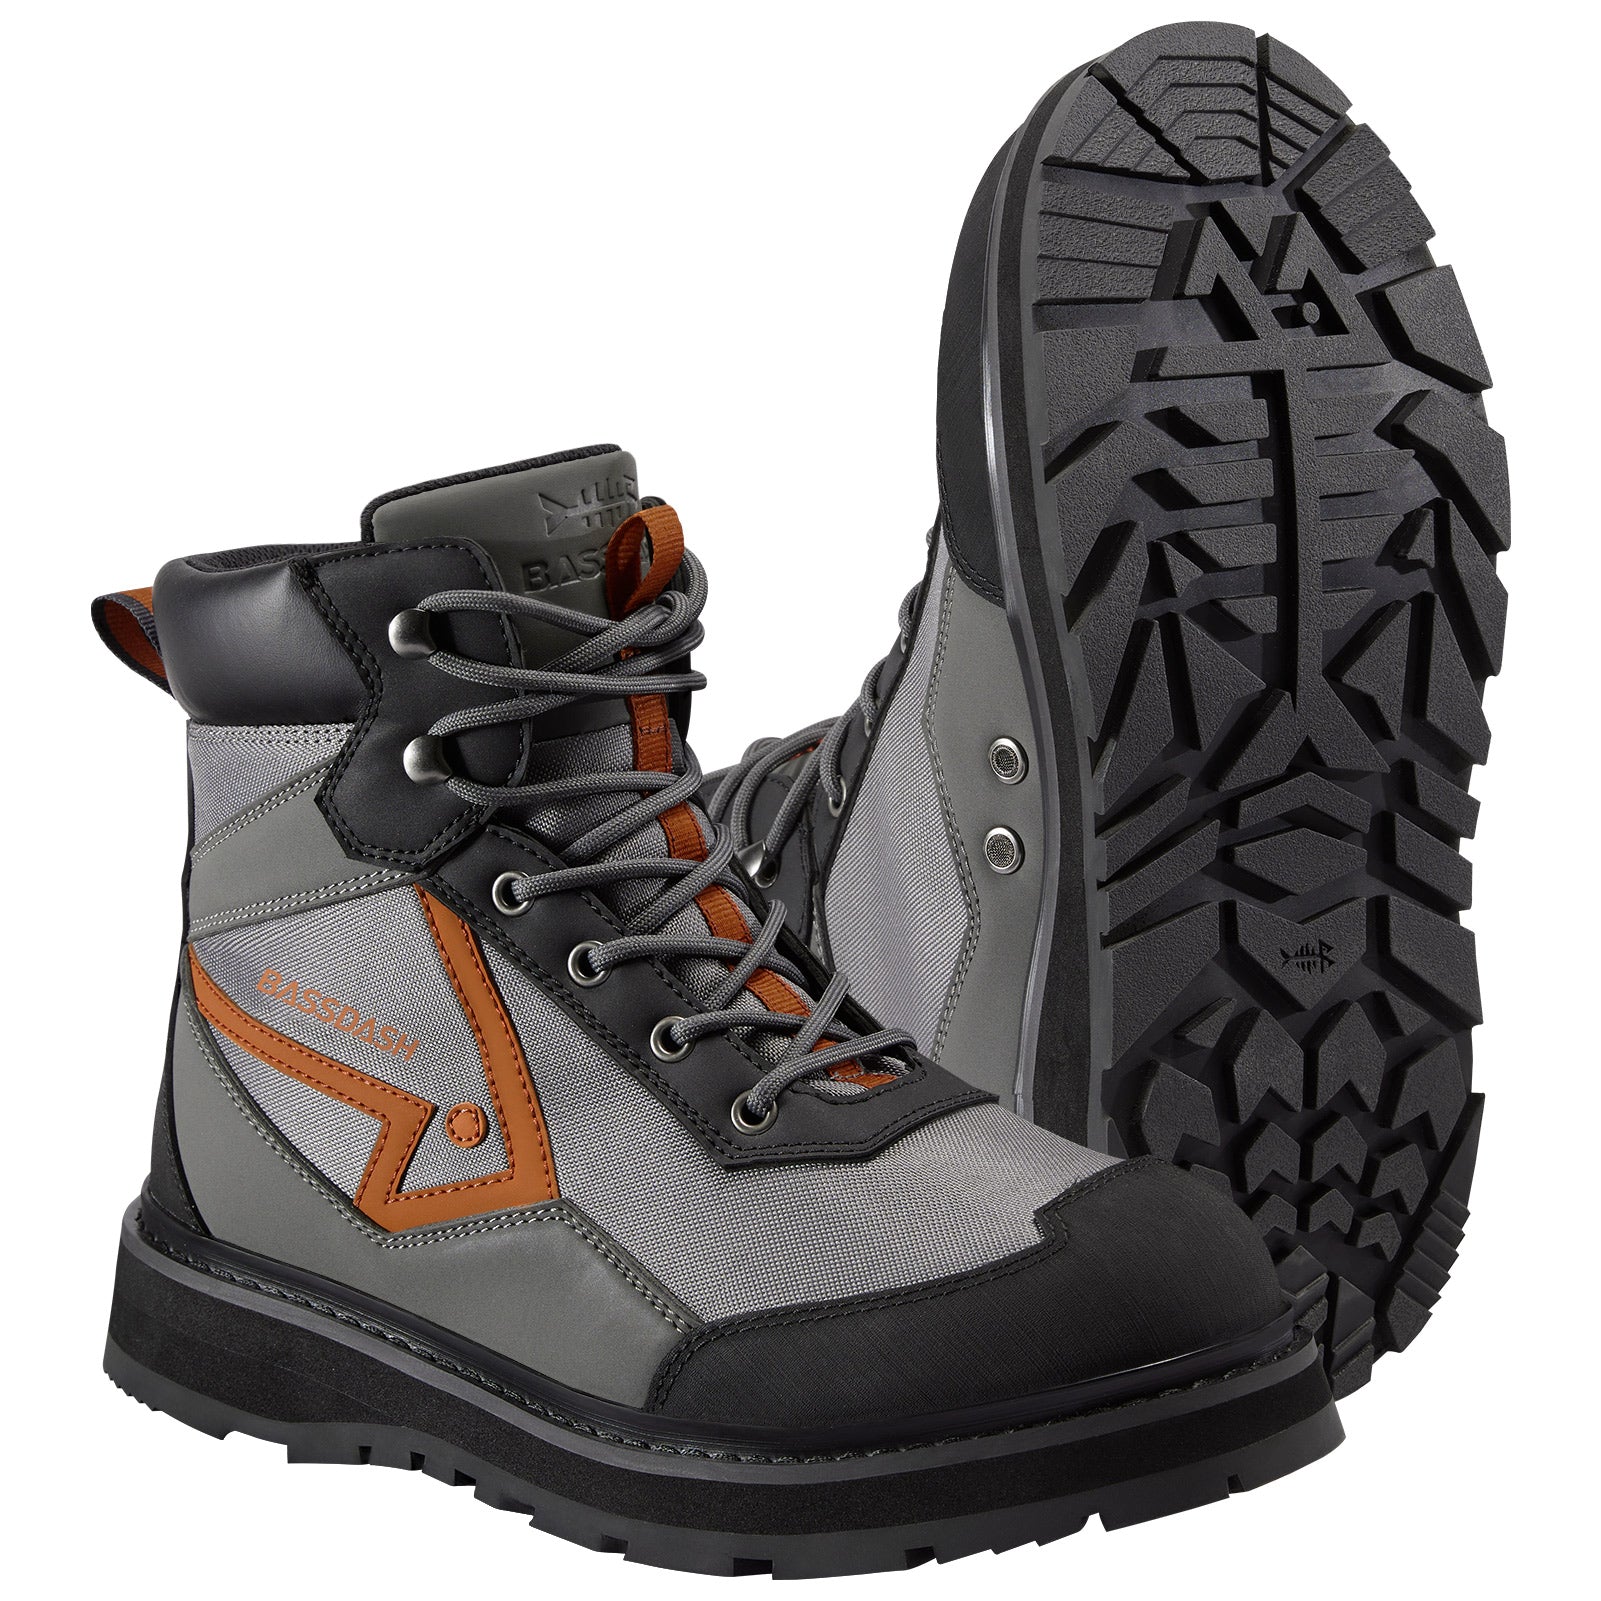 Mens Wading Boots Fly Fishing Wading Shoes with Anti-Slip Rubber Sole Black/Grey / 11